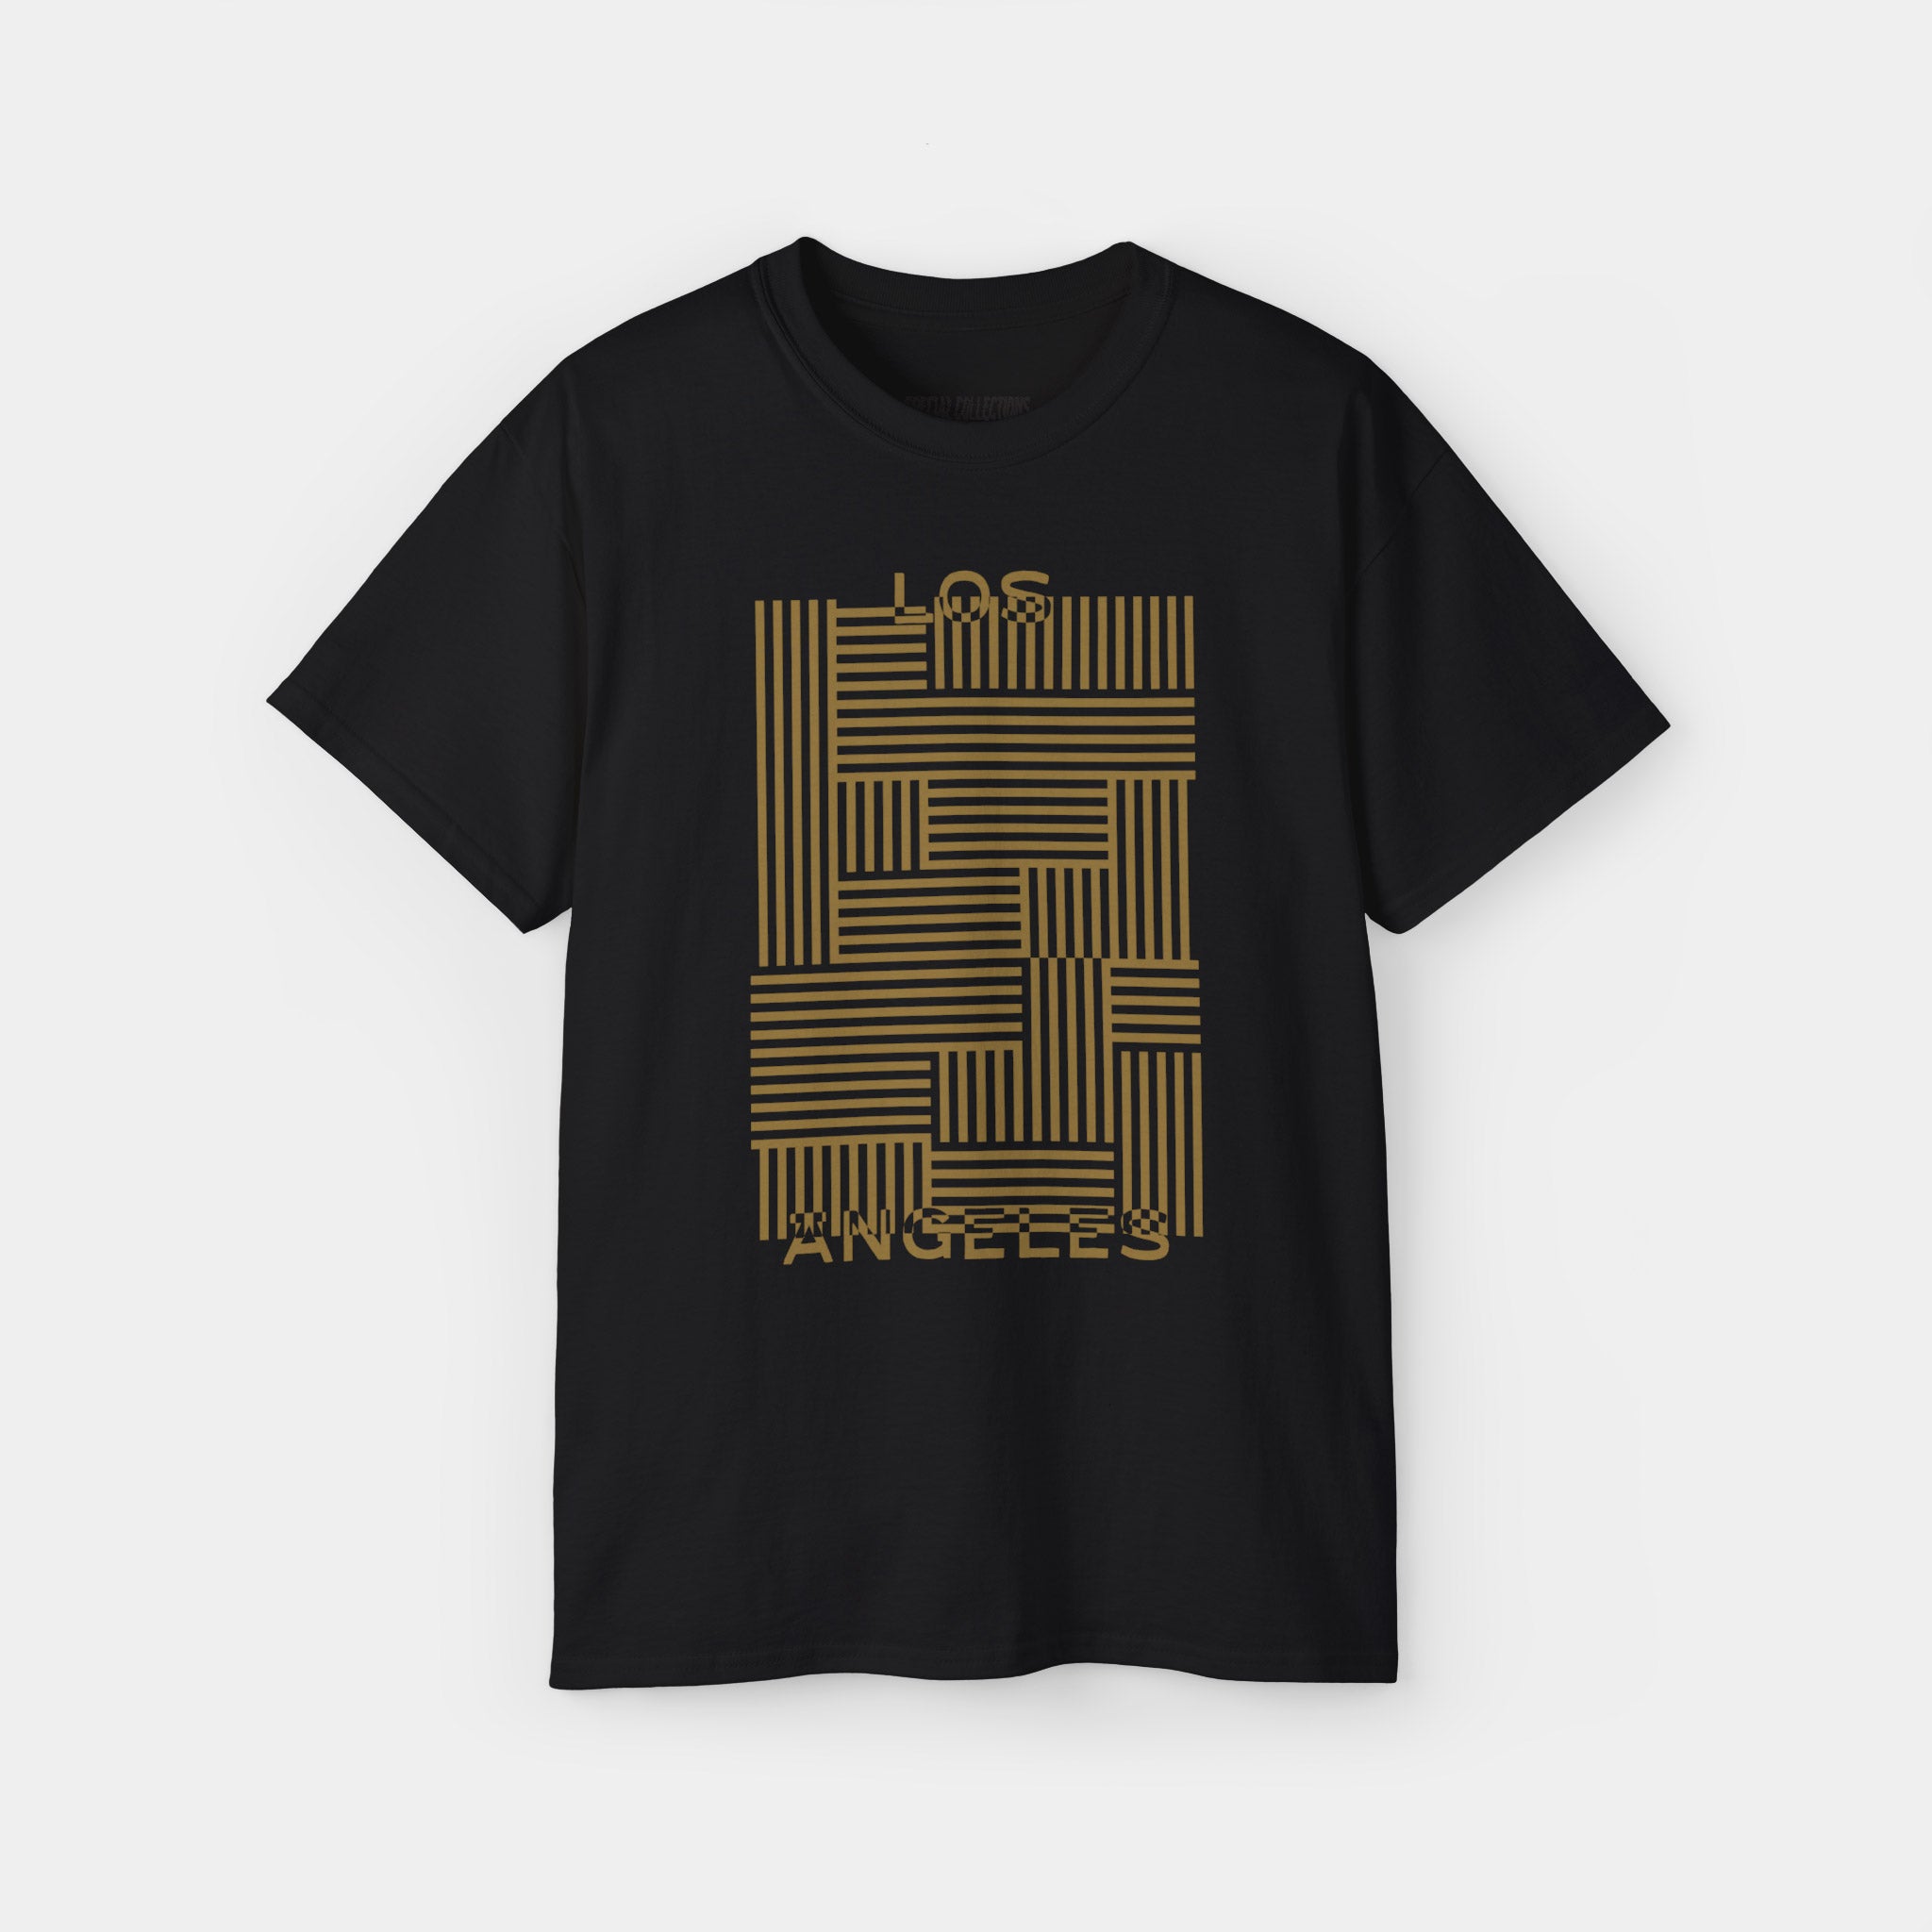 This Is Los Angeles (Wave 1B, LAFC) T-shirt